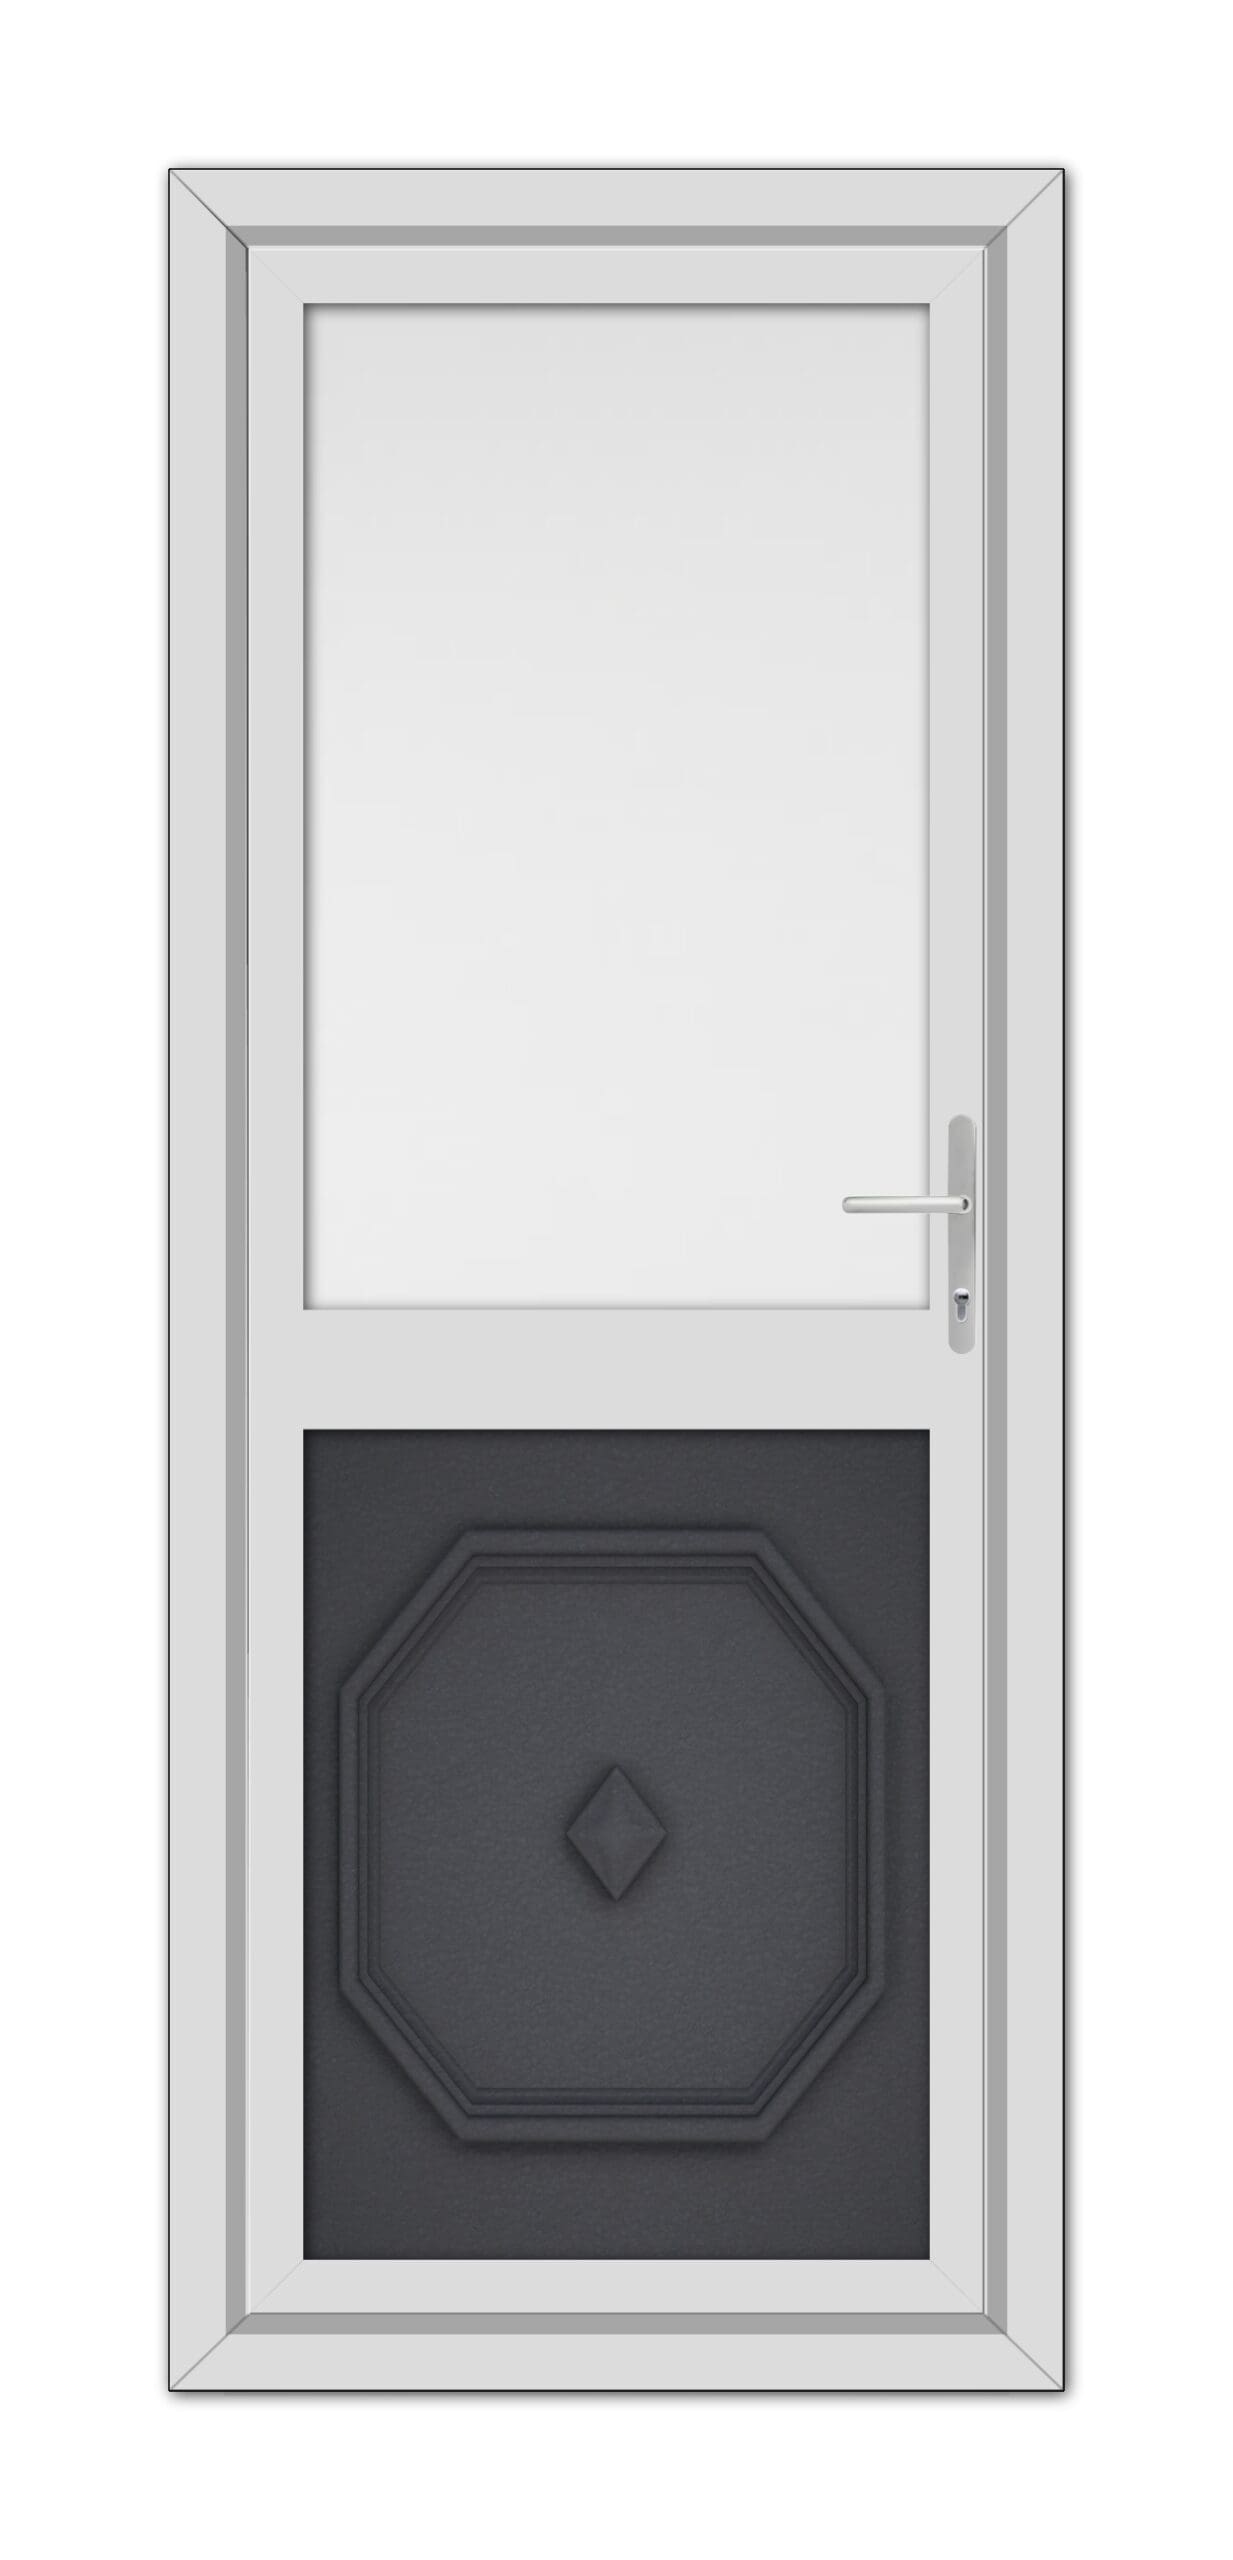 A modern Grey Grained Westminster Half uPVC Back Door featuring a geometric panel at the bottom and a glass window at the top, complete with a silver handle, isolated on white.